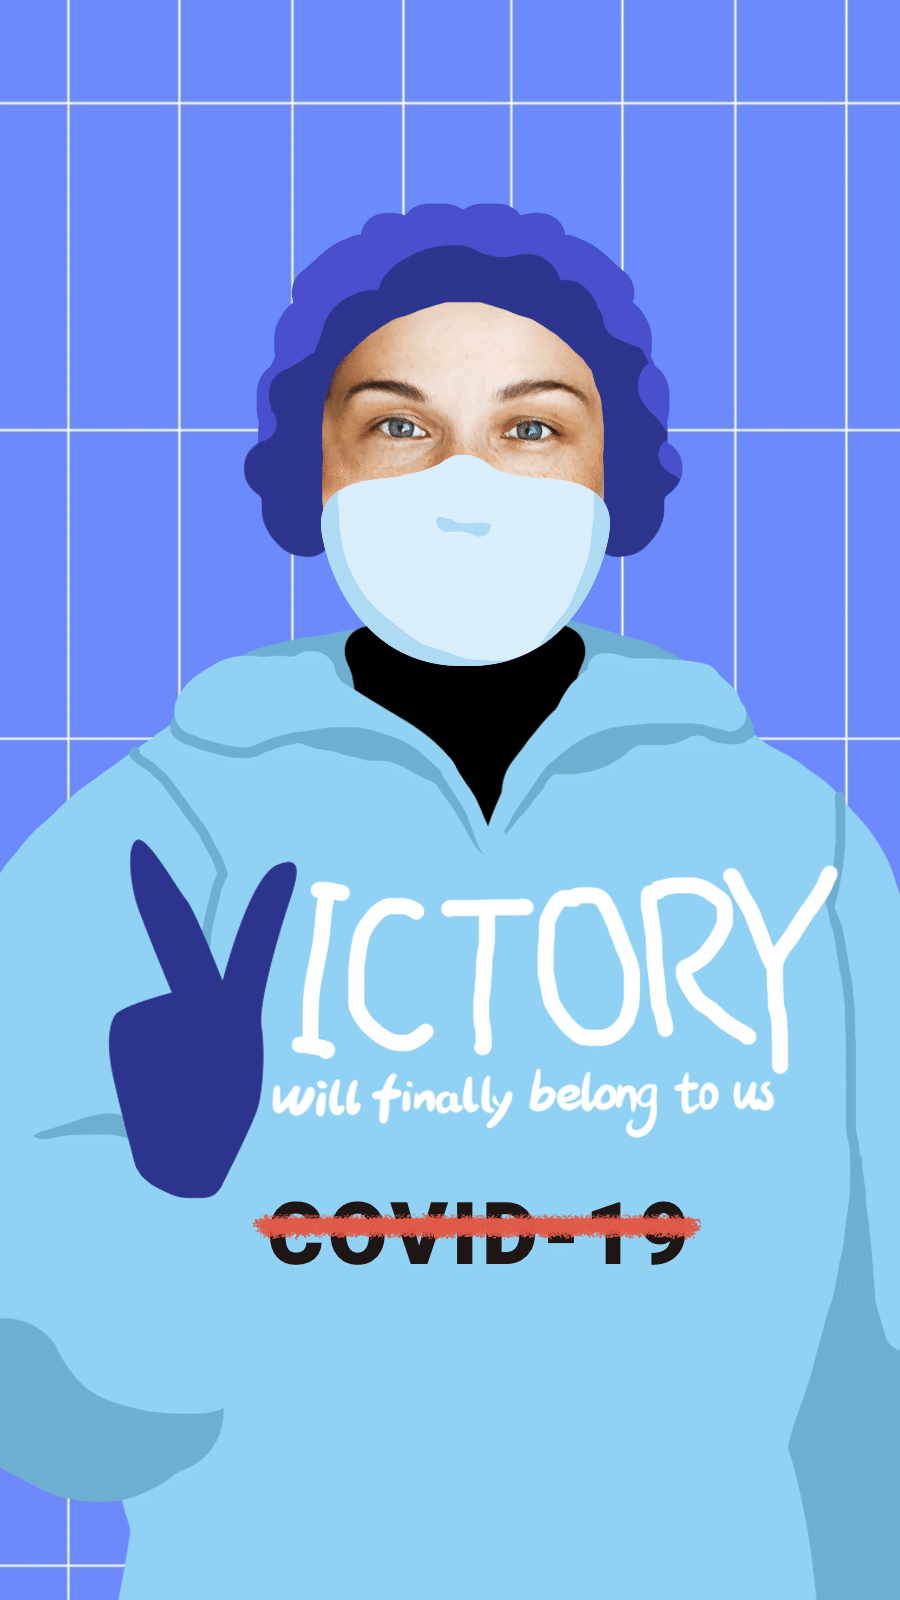 Creative COVID-19 Fight Victory Wishes Instagram Story